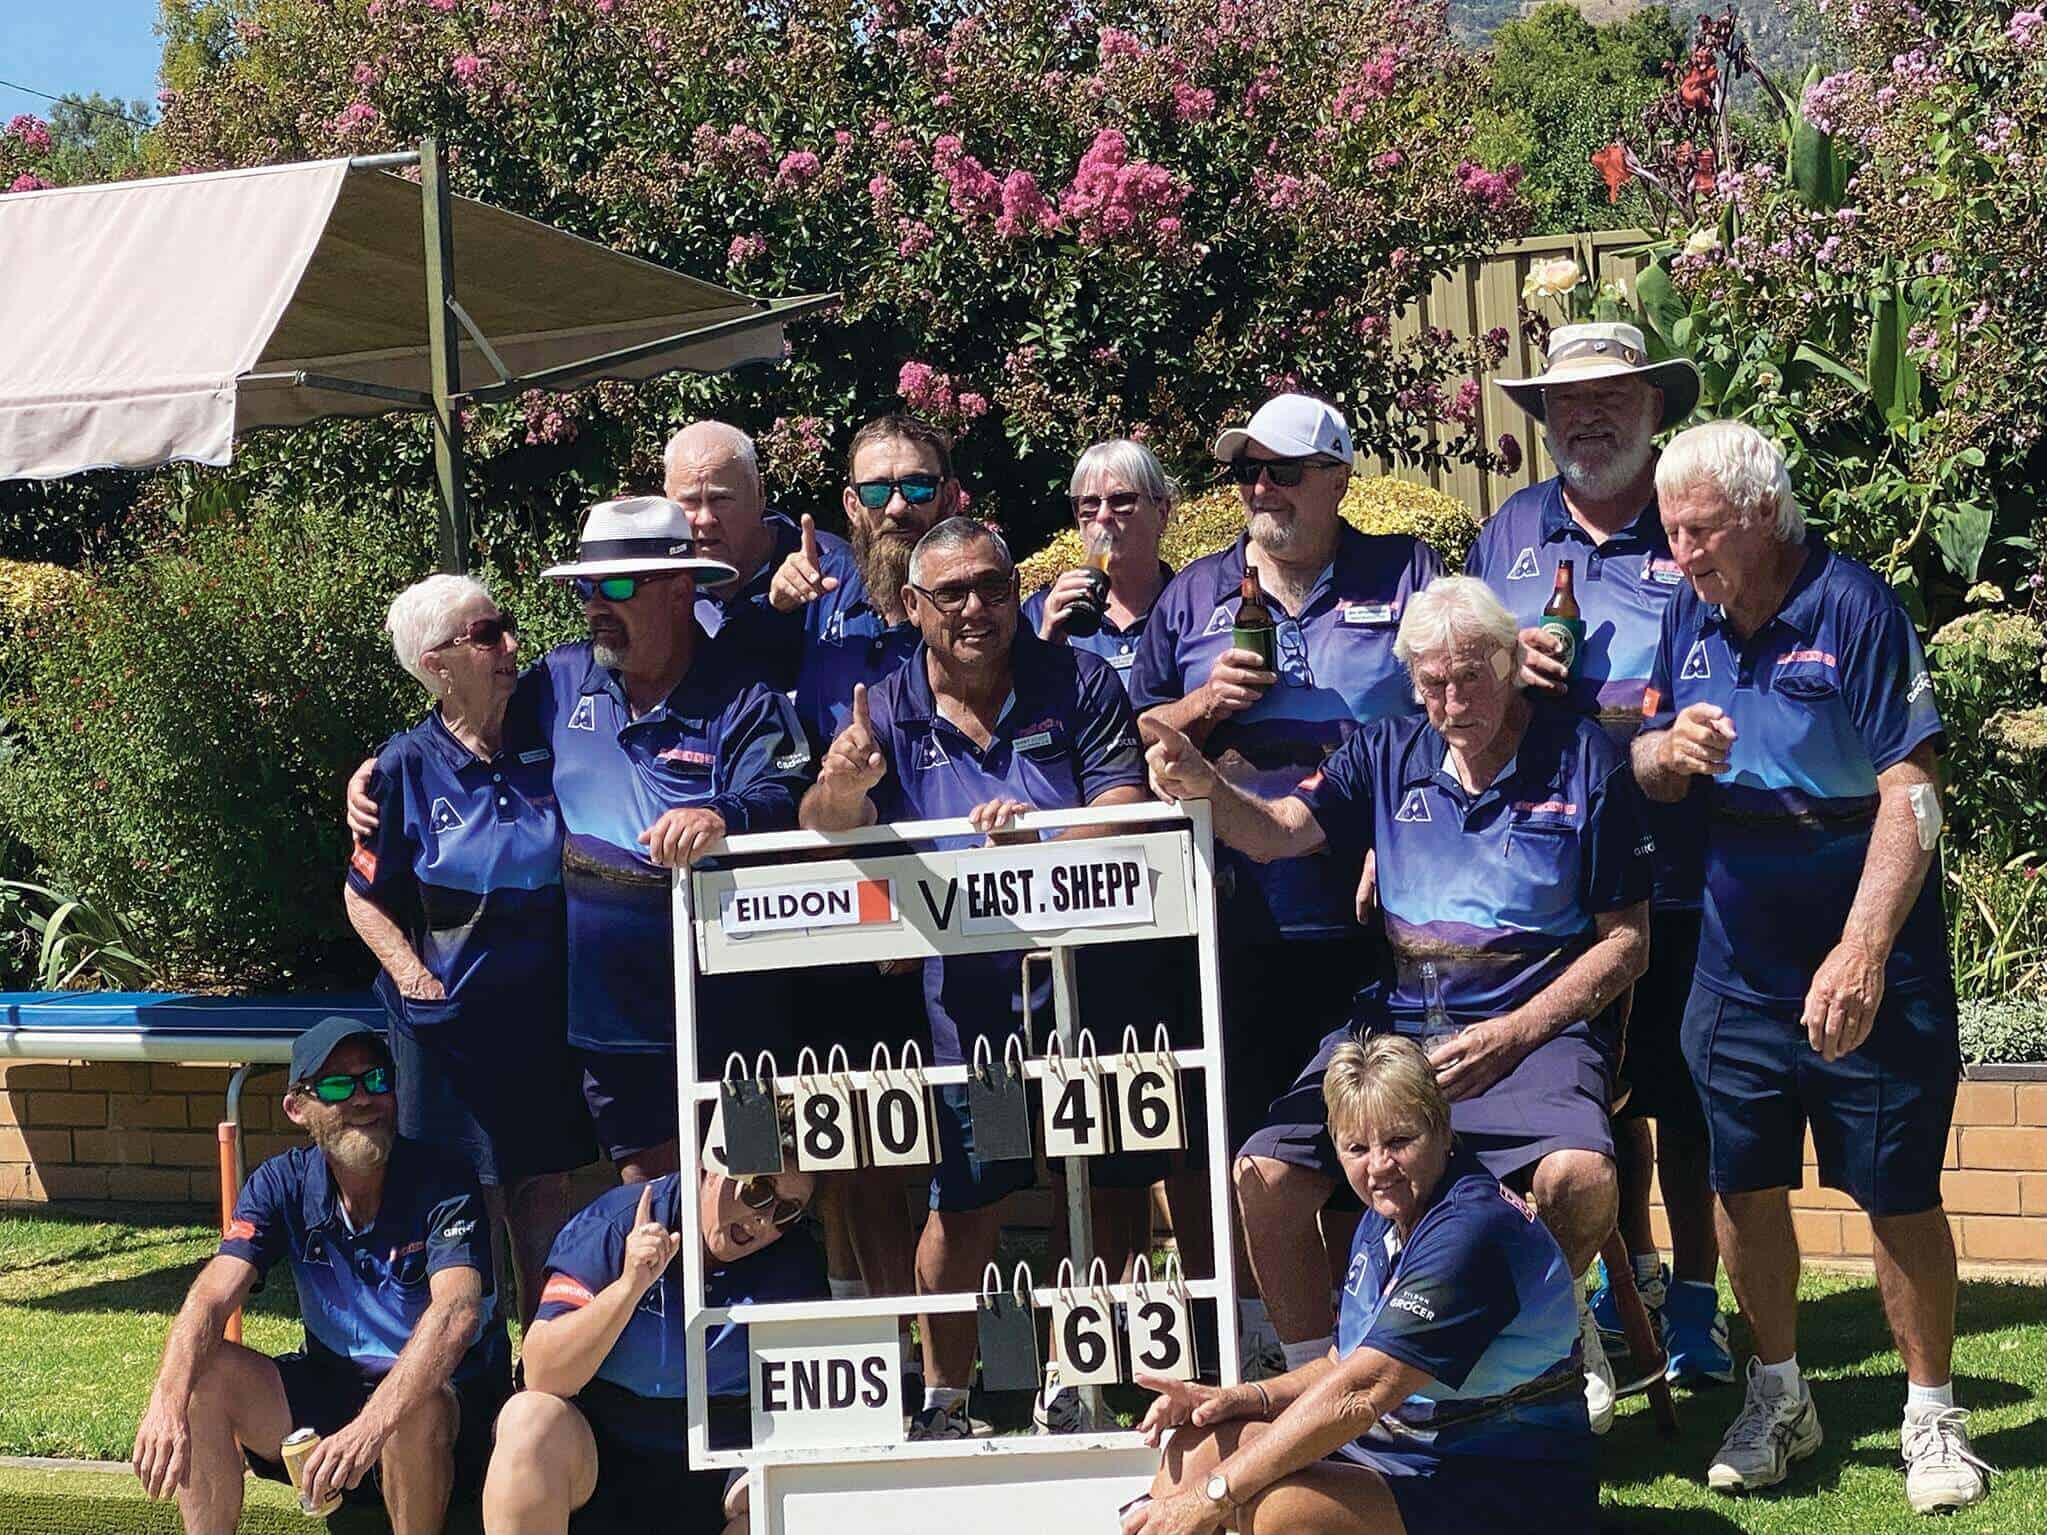 Eildon bowlers from the Tuesday pennant. Back row: Ian Layfield, Craig Parker, Marie Cossie, Jim Wheelhouse and Ian Uthenwoldt. Middle row: Maureen Aked, Ray Holt, Barry Elliott, Rod McGowan and Graeme Barber. Front row: Rick Sproles, Gale George and Lynn Cain-Barber.